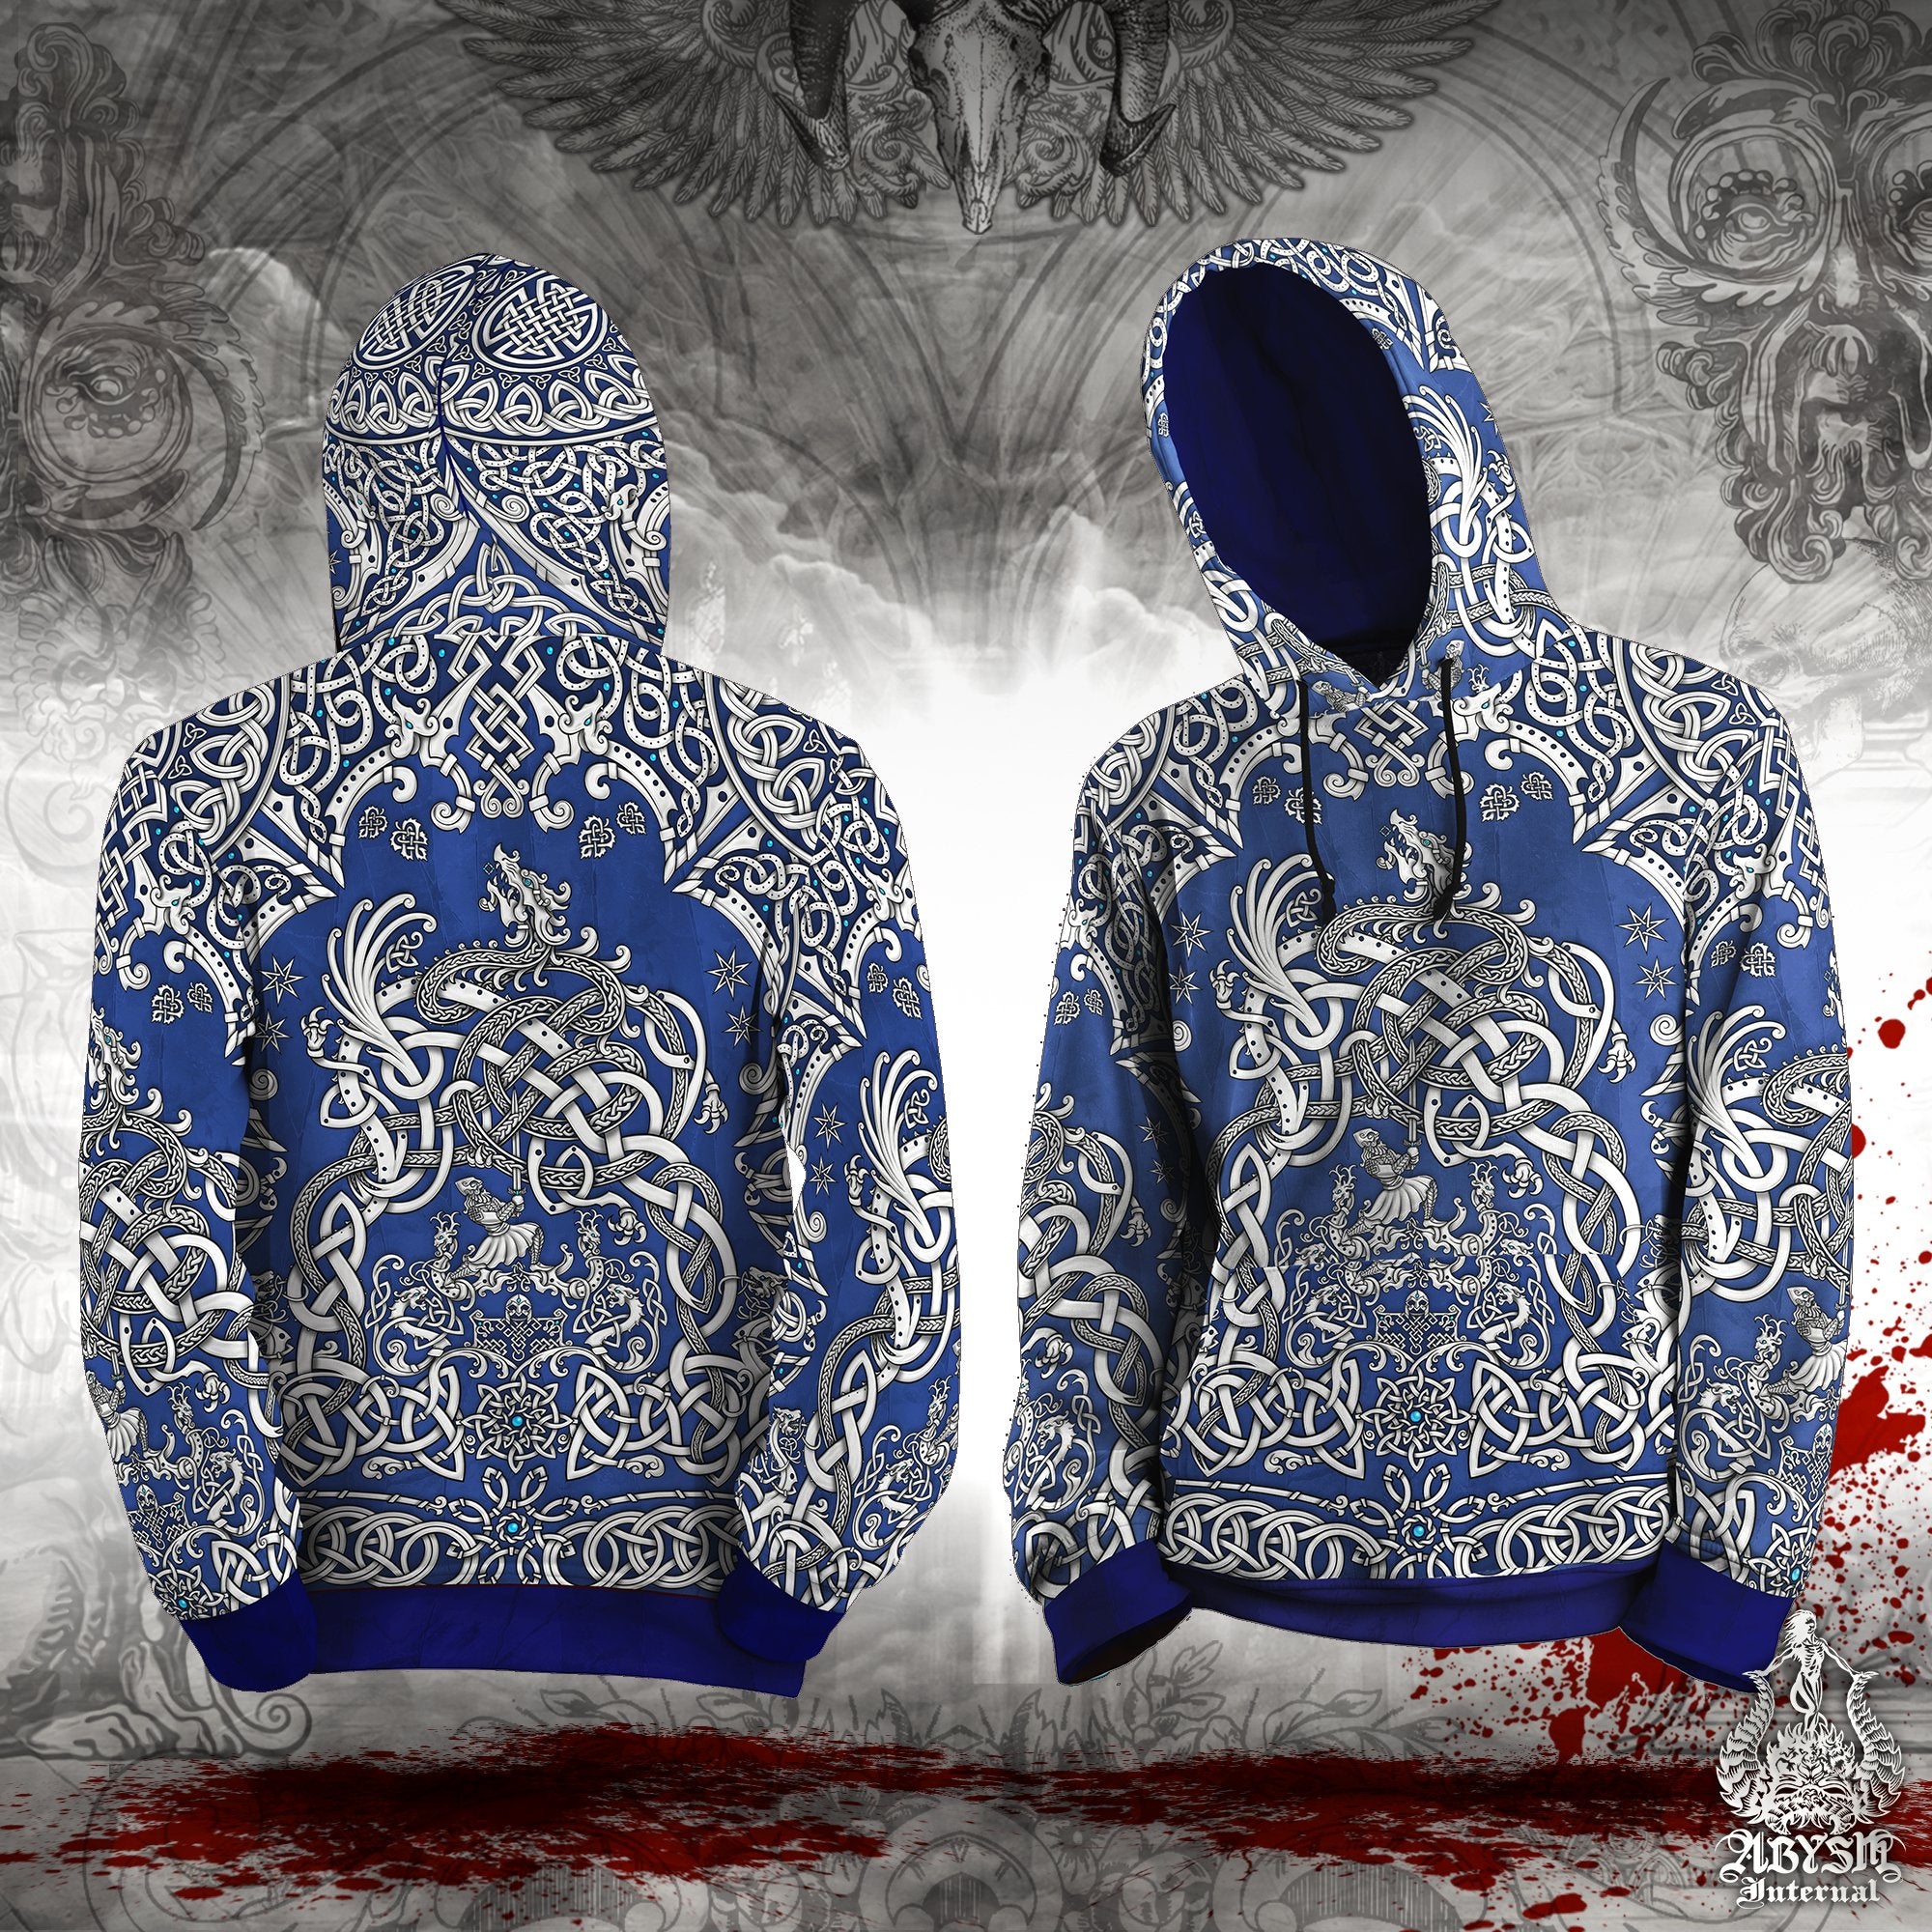 Viking Hoodie, Nordic Art Sweater, Fantasy Street Outfit, White Norse Dragon Streetwear, Alternative Clothing, Unisex - Fafnir, Blue, Red and Black, 3 Colors - Abysm Internal